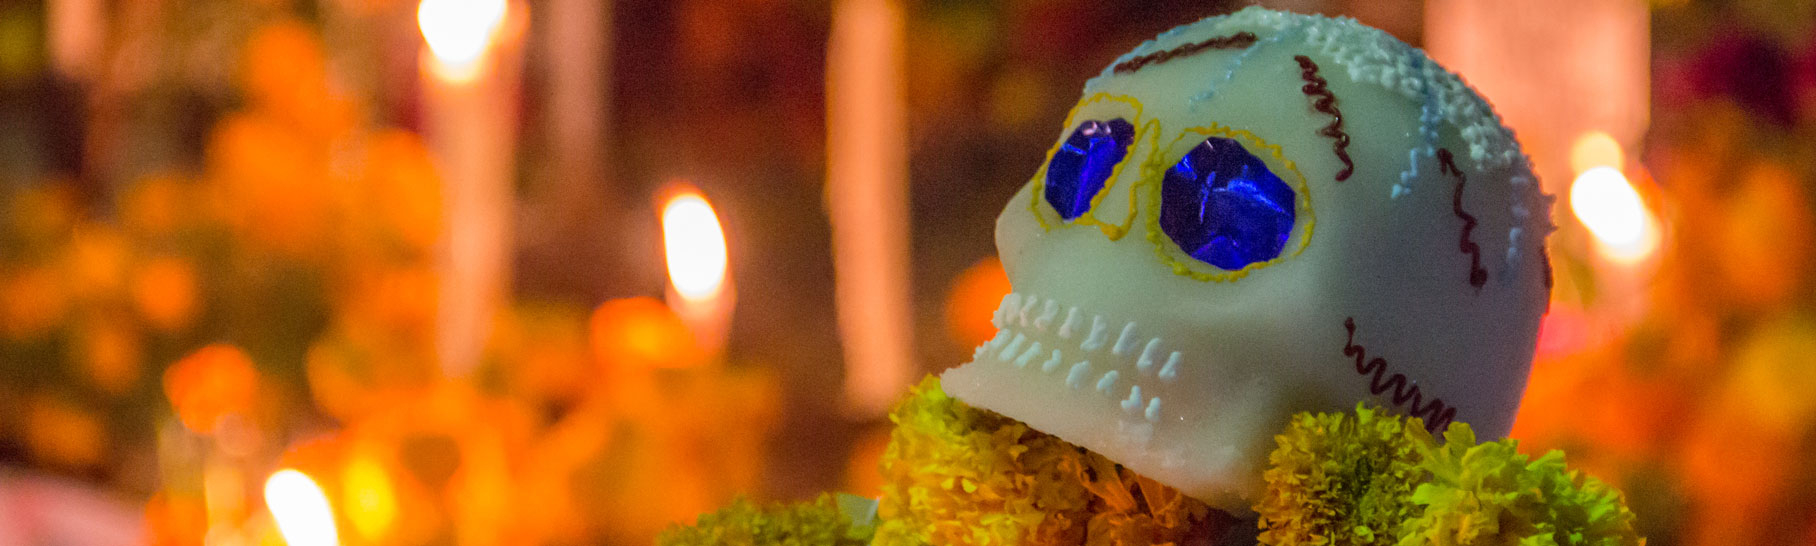 Decorative skull placed on an ofrenda with candles lit in the background